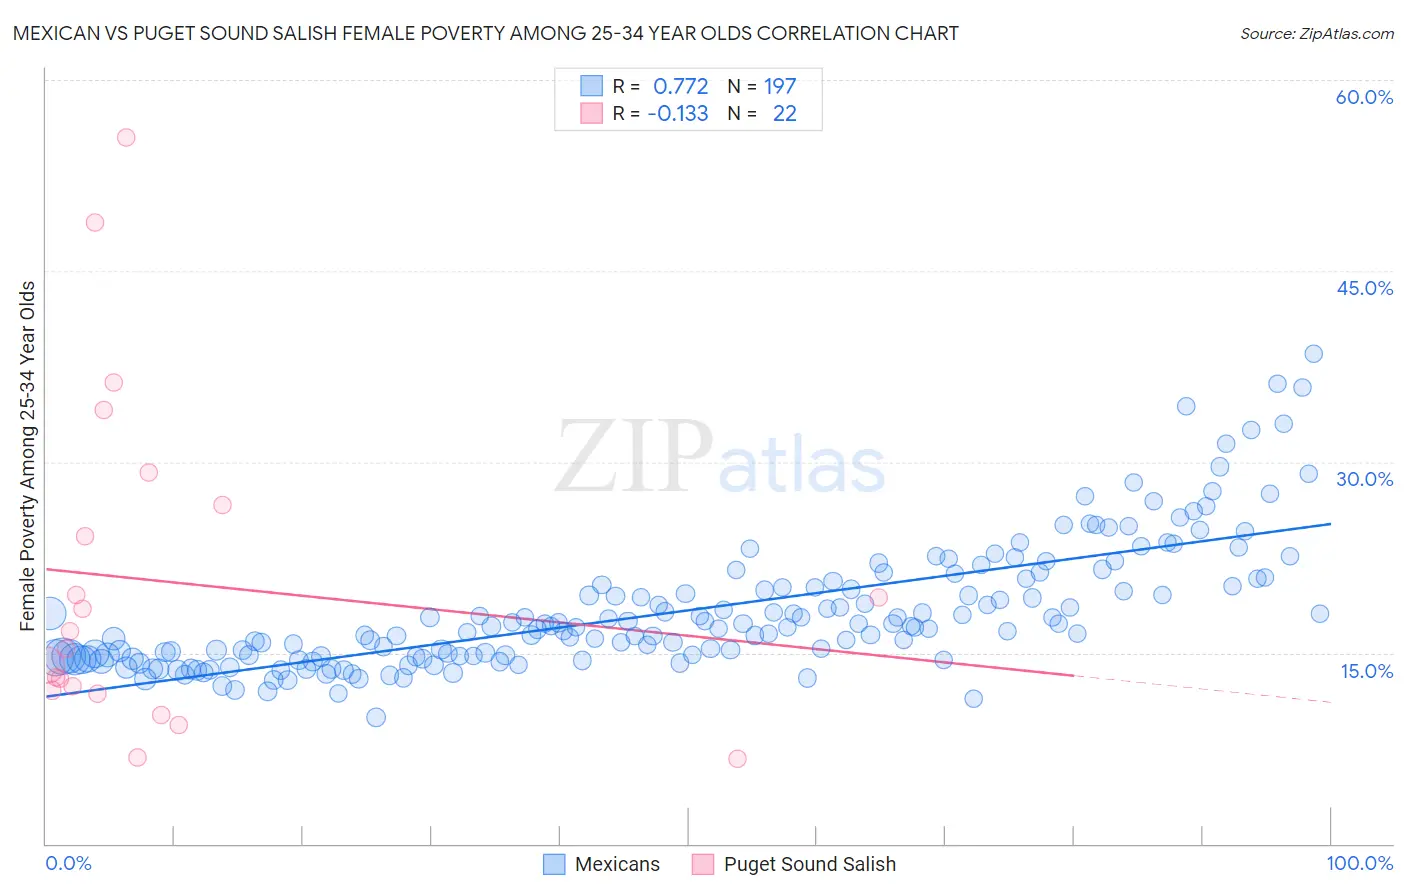 Mexican vs Puget Sound Salish Female Poverty Among 25-34 Year Olds